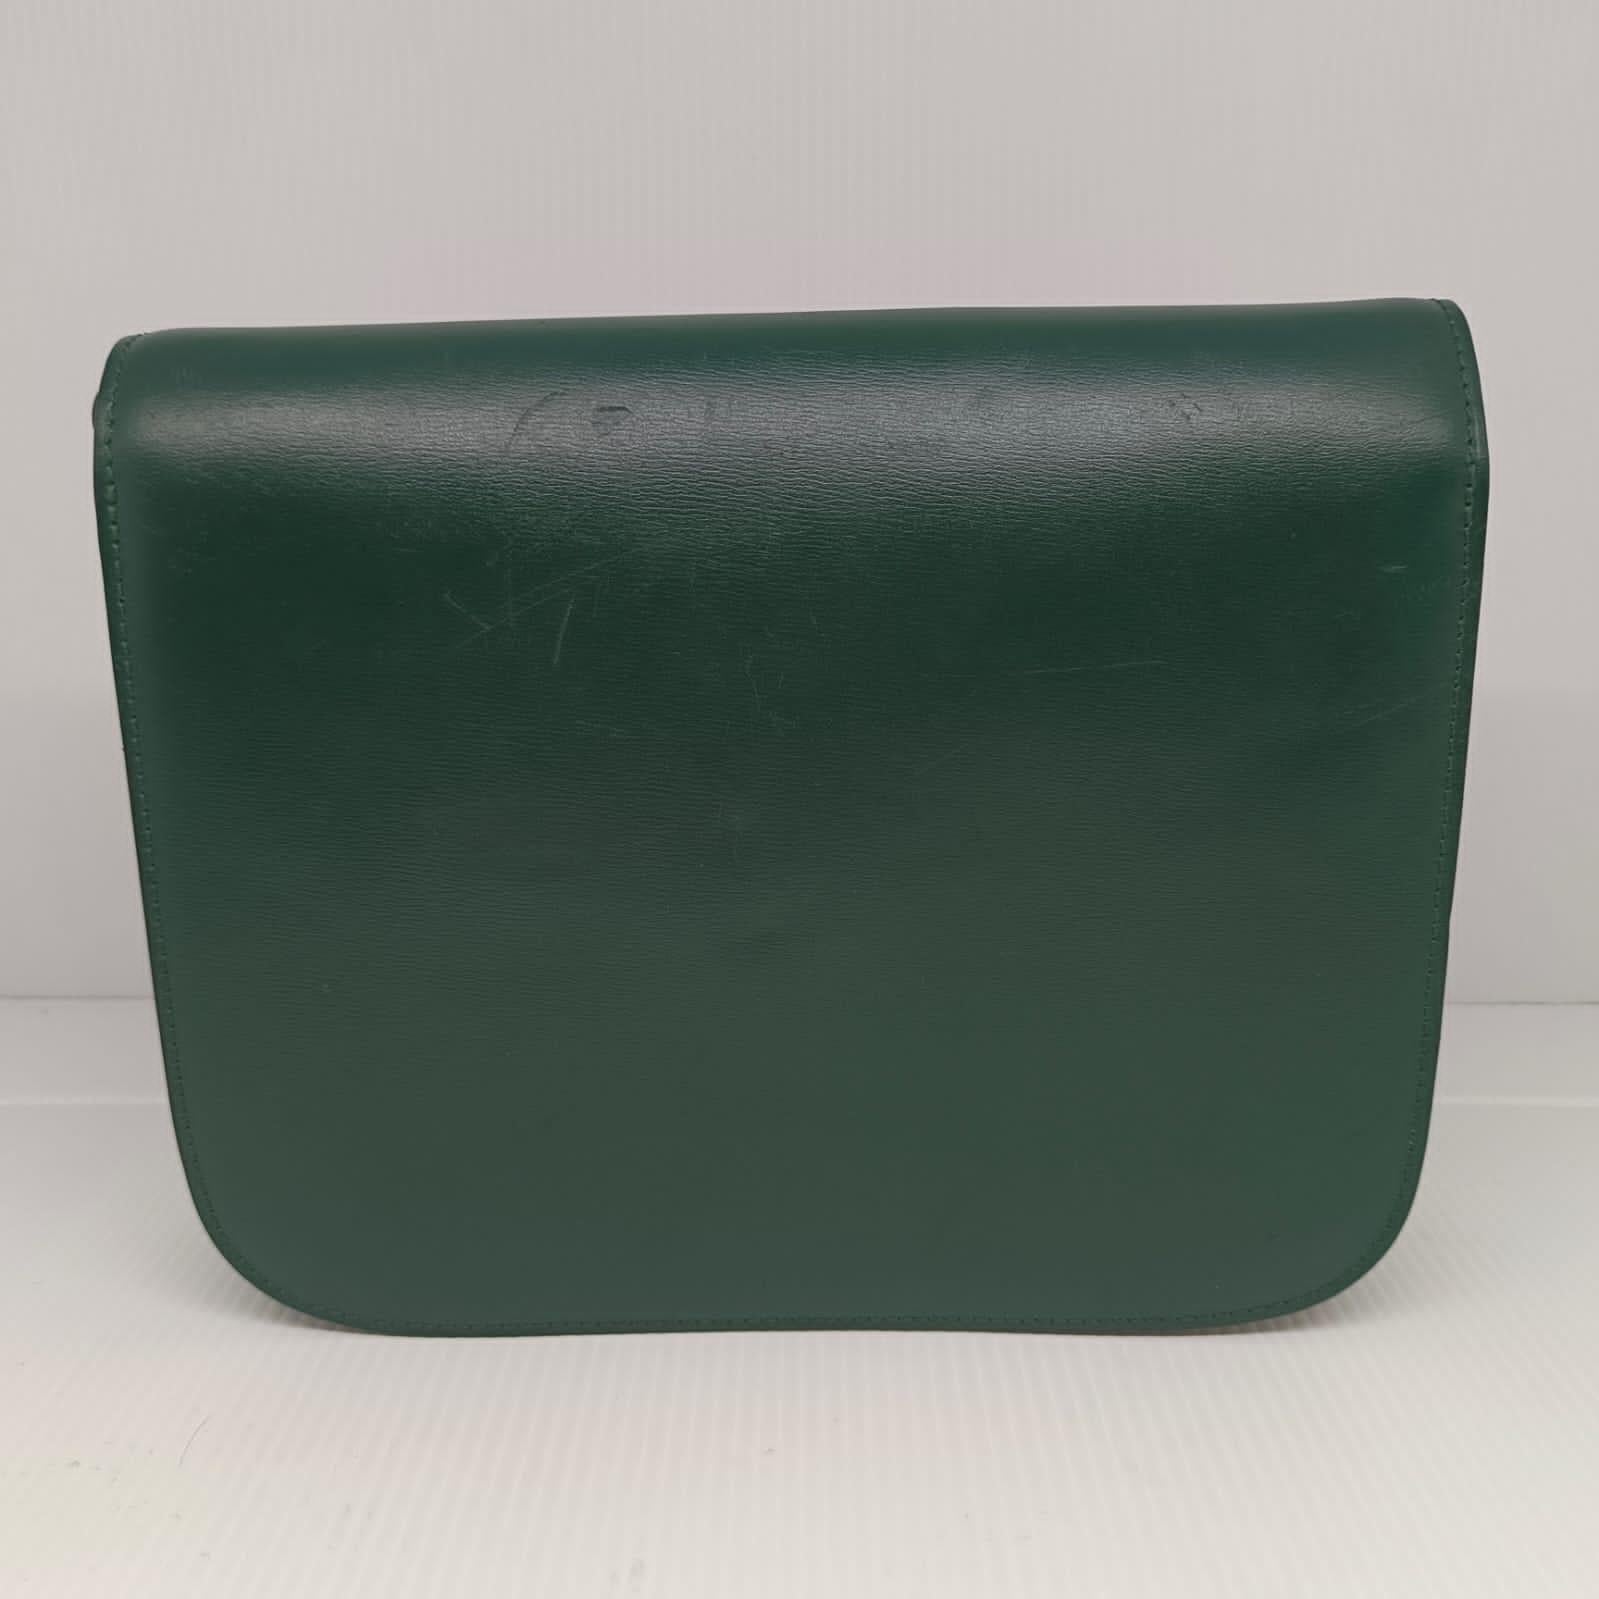 Celine medium box bag in emerald green with gold hardware. Visible dents and scratches throughout the leather surface. Very minor crack on the strap hole due to usage. Comes as it is. Adjustable strap.